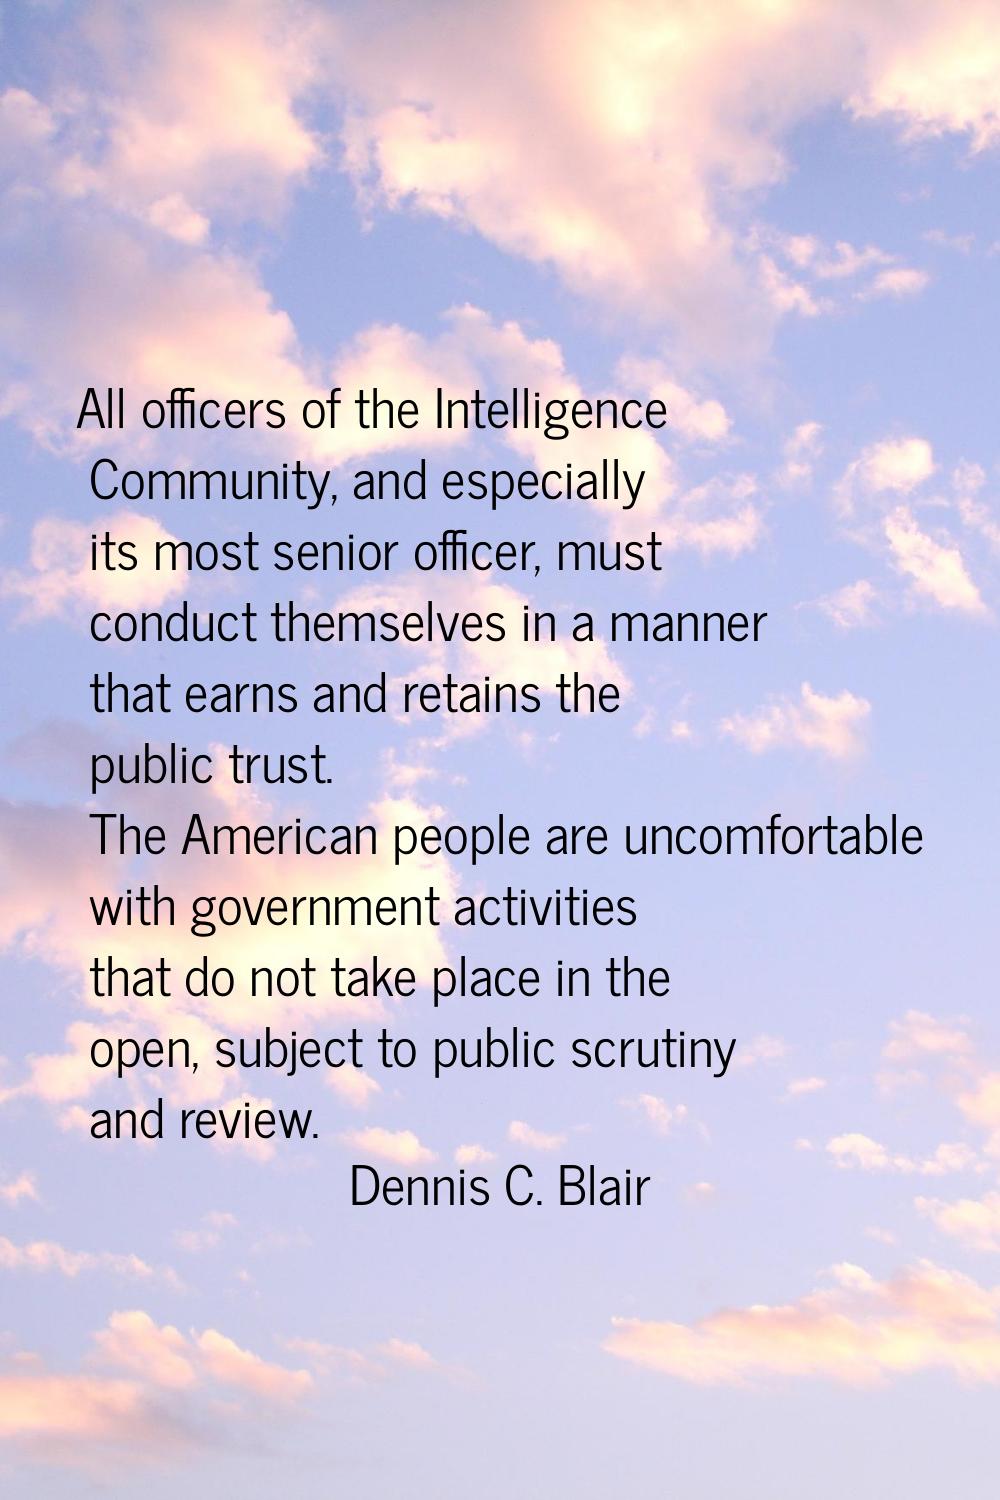 All officers of the Intelligence Community, and especially its most senior officer, must conduct th